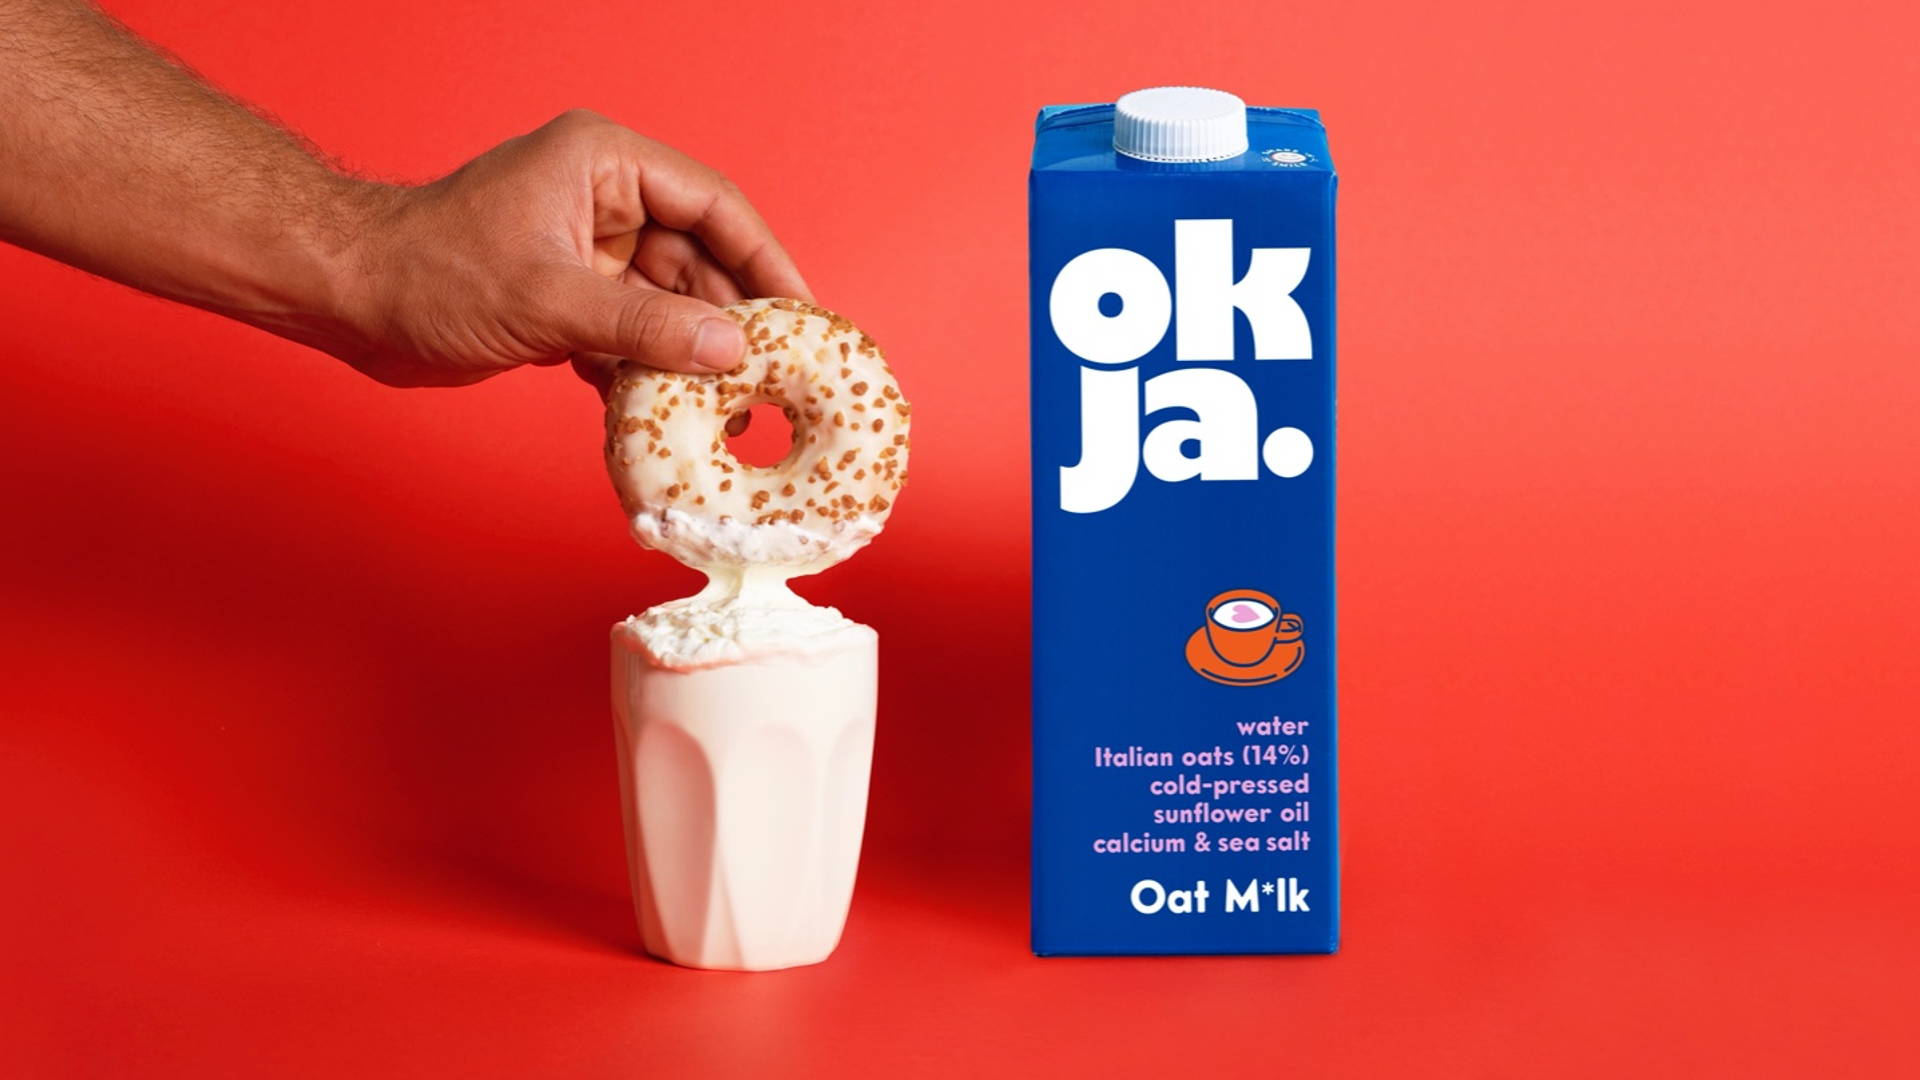 Featured image for OKJA is a Straightforward Oat M*lk With a Design to Match